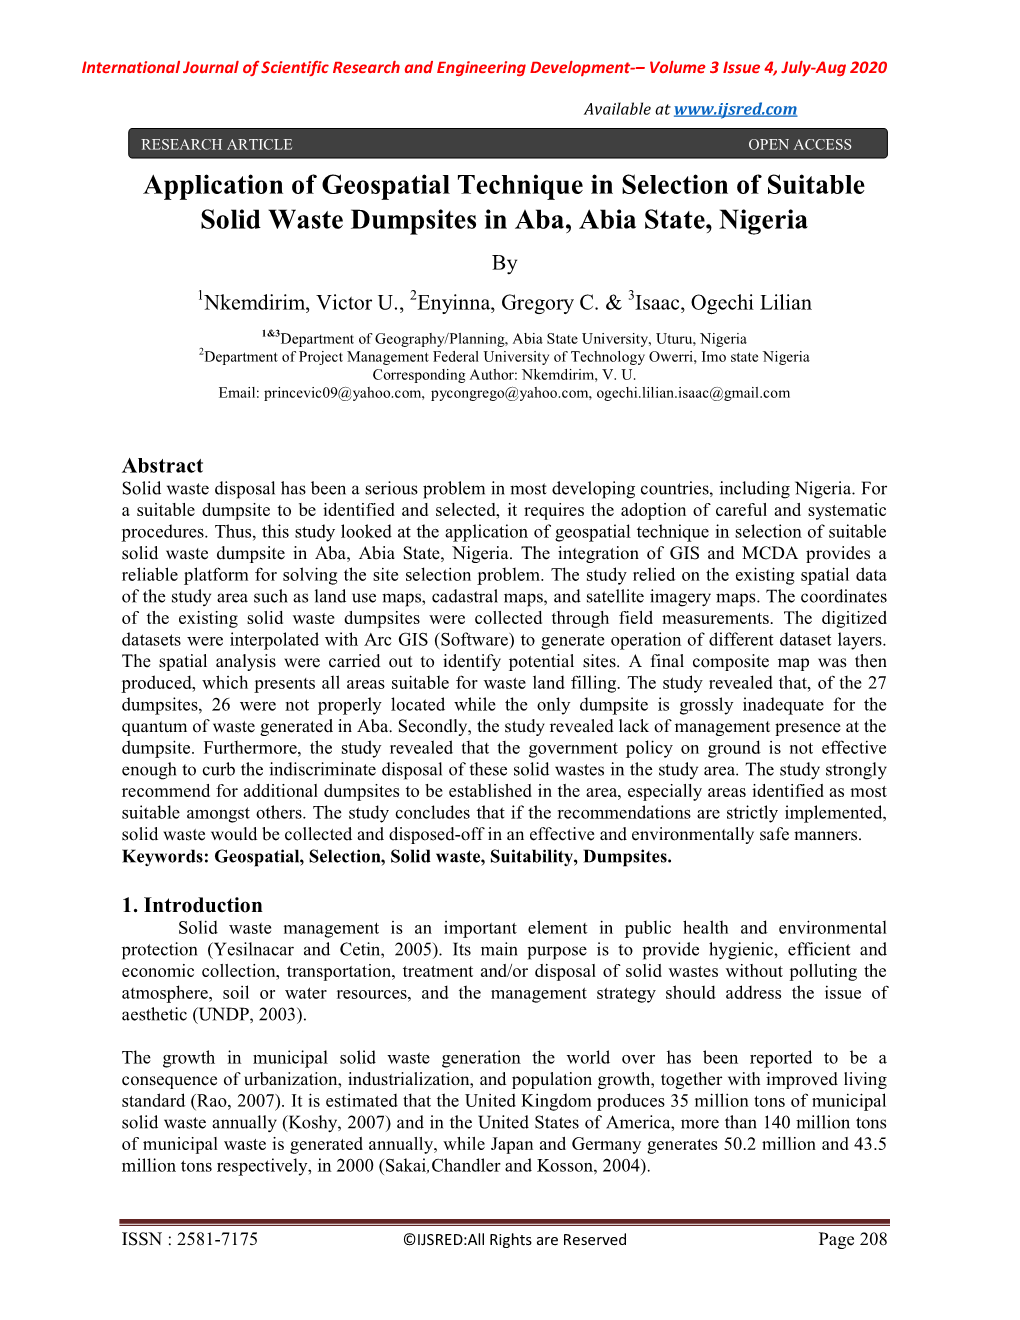 Application of Geospatial Technique in Selection of Suitable Solid Waste Dumpsites in Aba, Abia State, Nigeria by 1Nkemdirim, Victor U., 2Enyinna, Gregory C